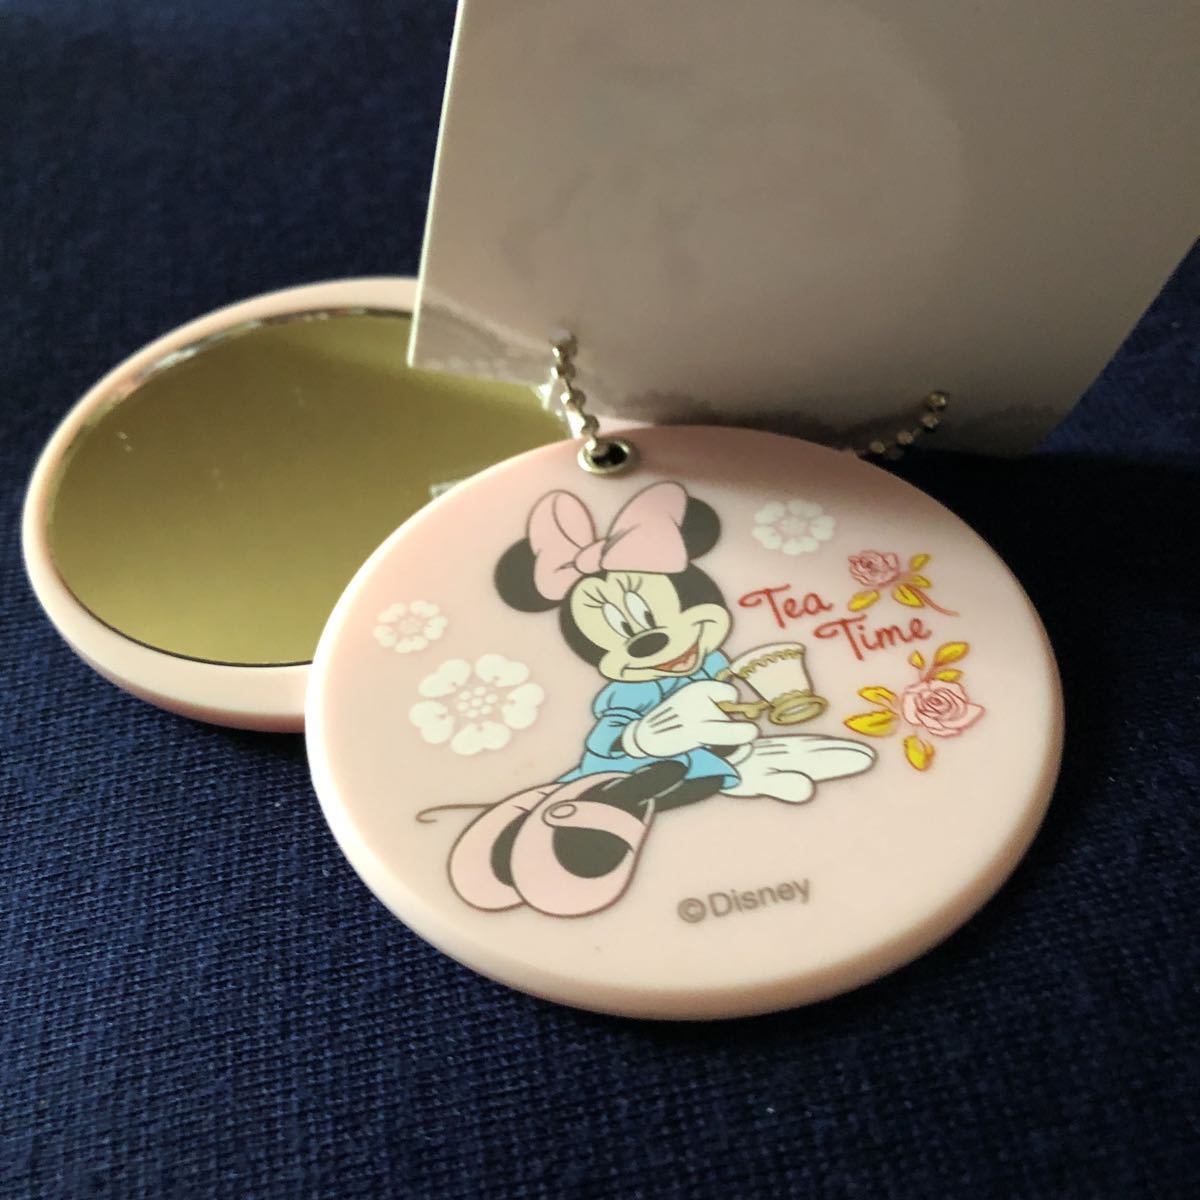  rare not for sale Disney Minnie Mouse DHC original mirror Novelty 